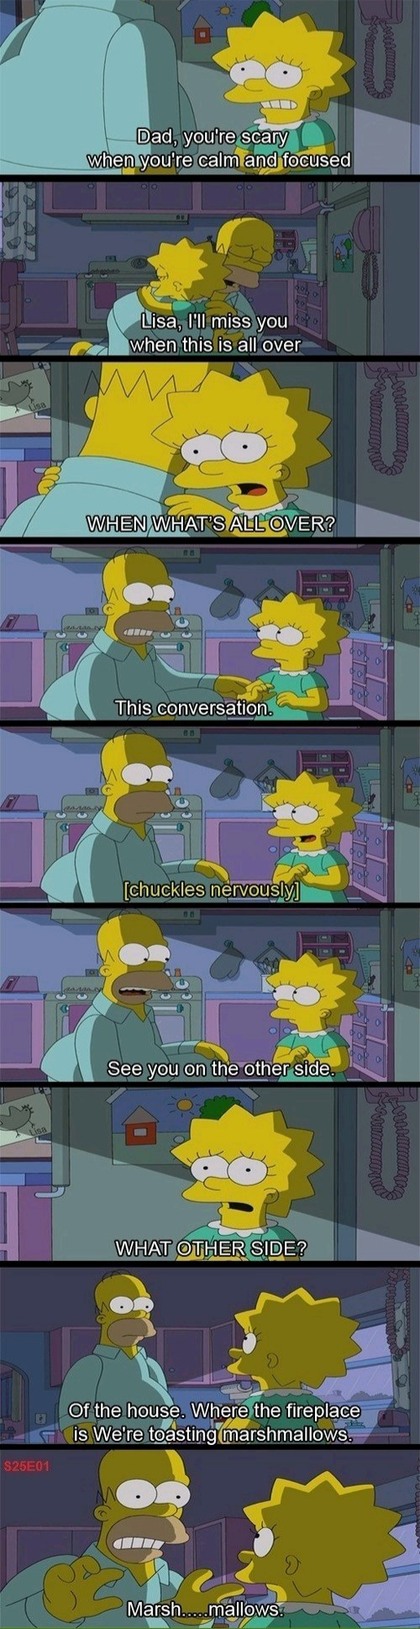 Homer at his finest - meme